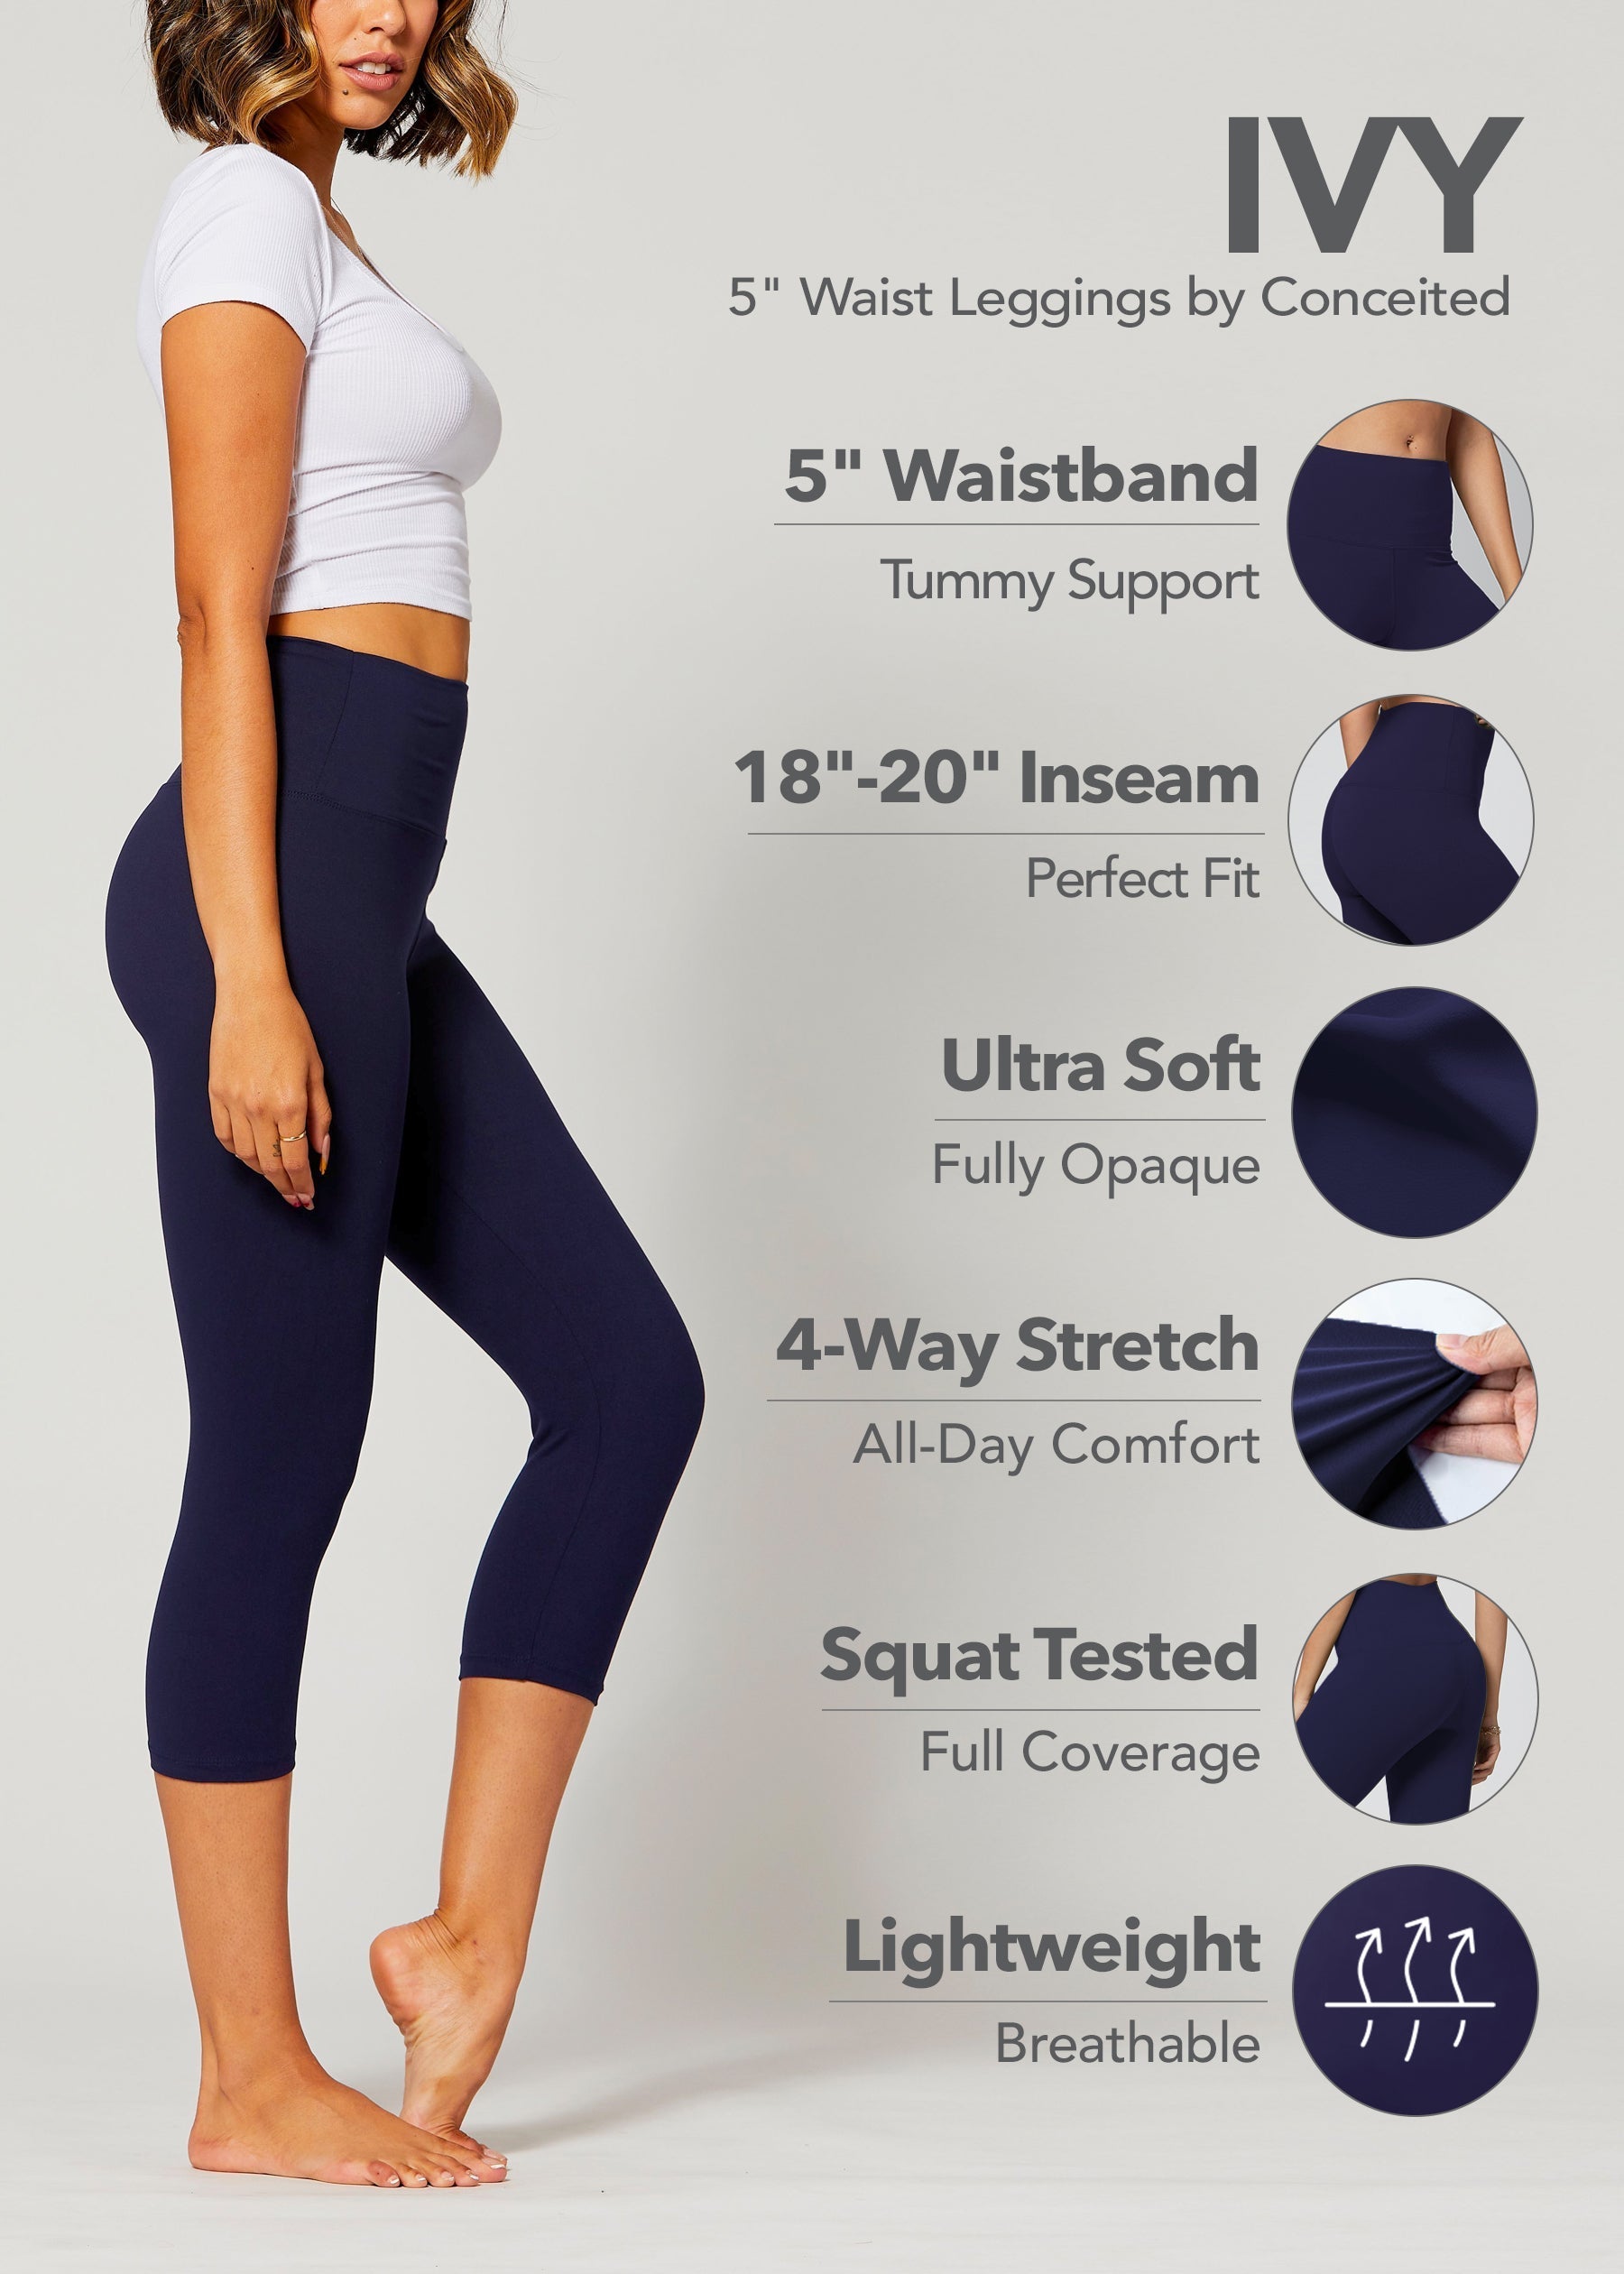 Conceited Women's Ivy Buttery Soft High Waist Basic Leggings 